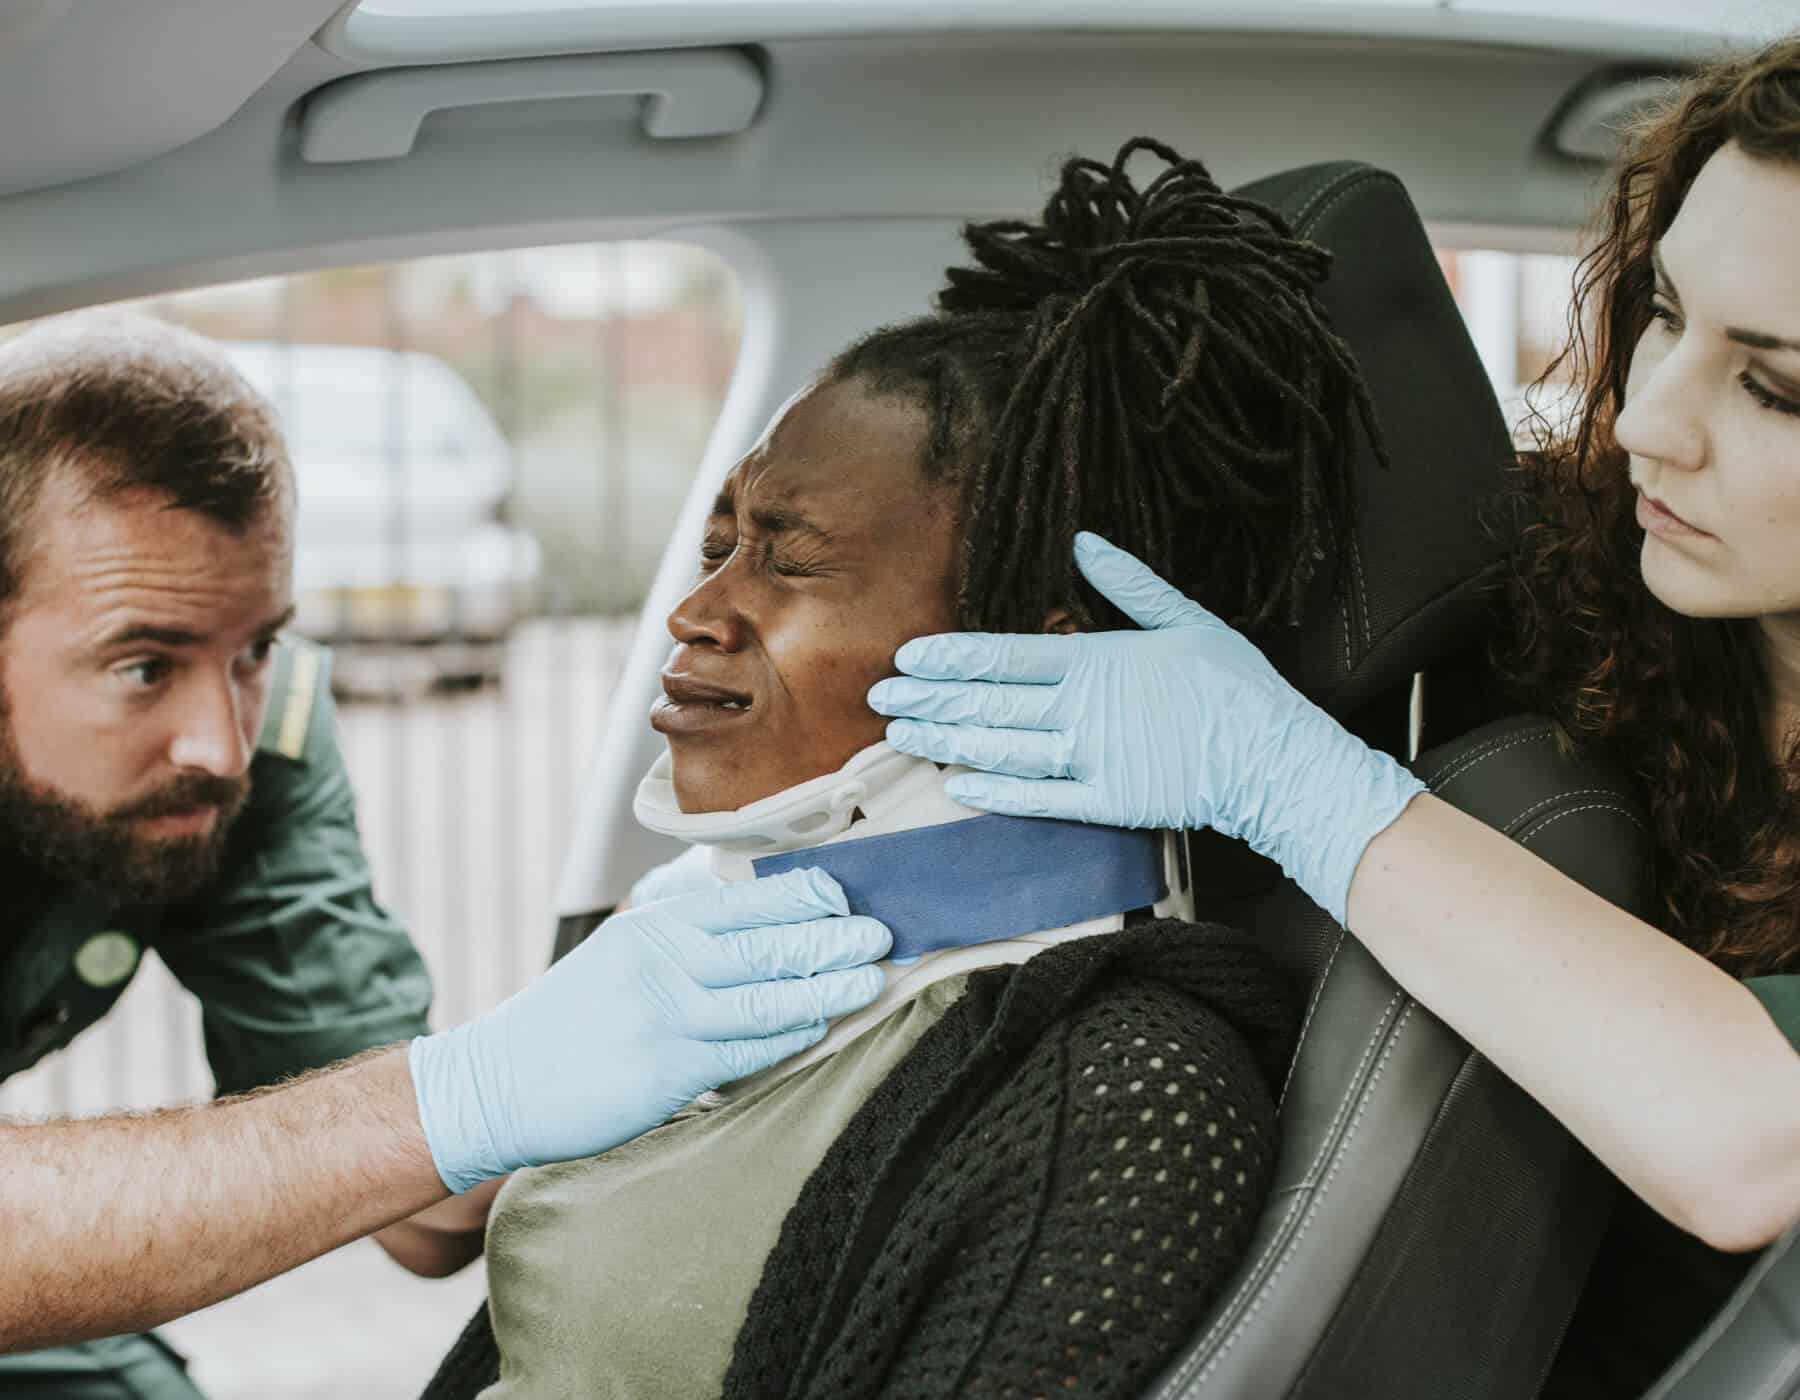 Medical staff putting neck stabilizer on a person in a car accident